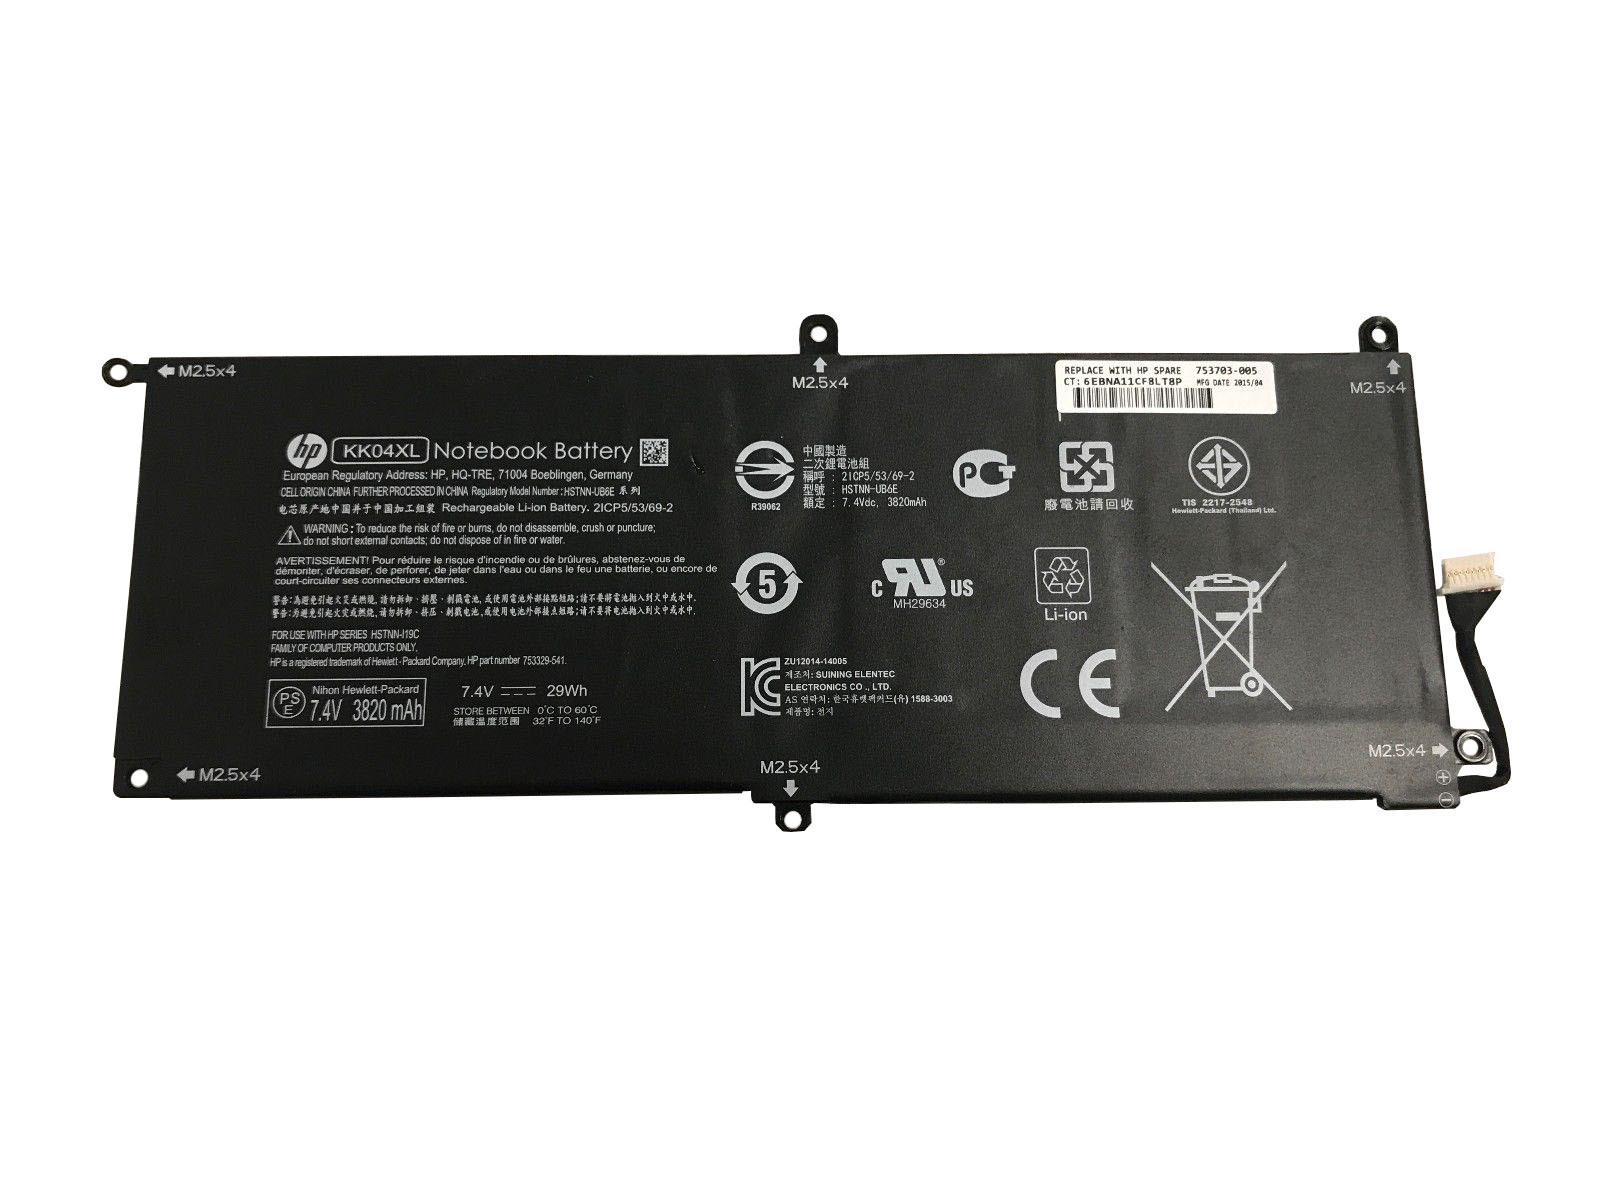 Primary image for HSTNN-IB6E HP Pro X2 612 G1 Battery J9Z38AW K8W67UP N6M30UP T9K79US Y2Q12UP